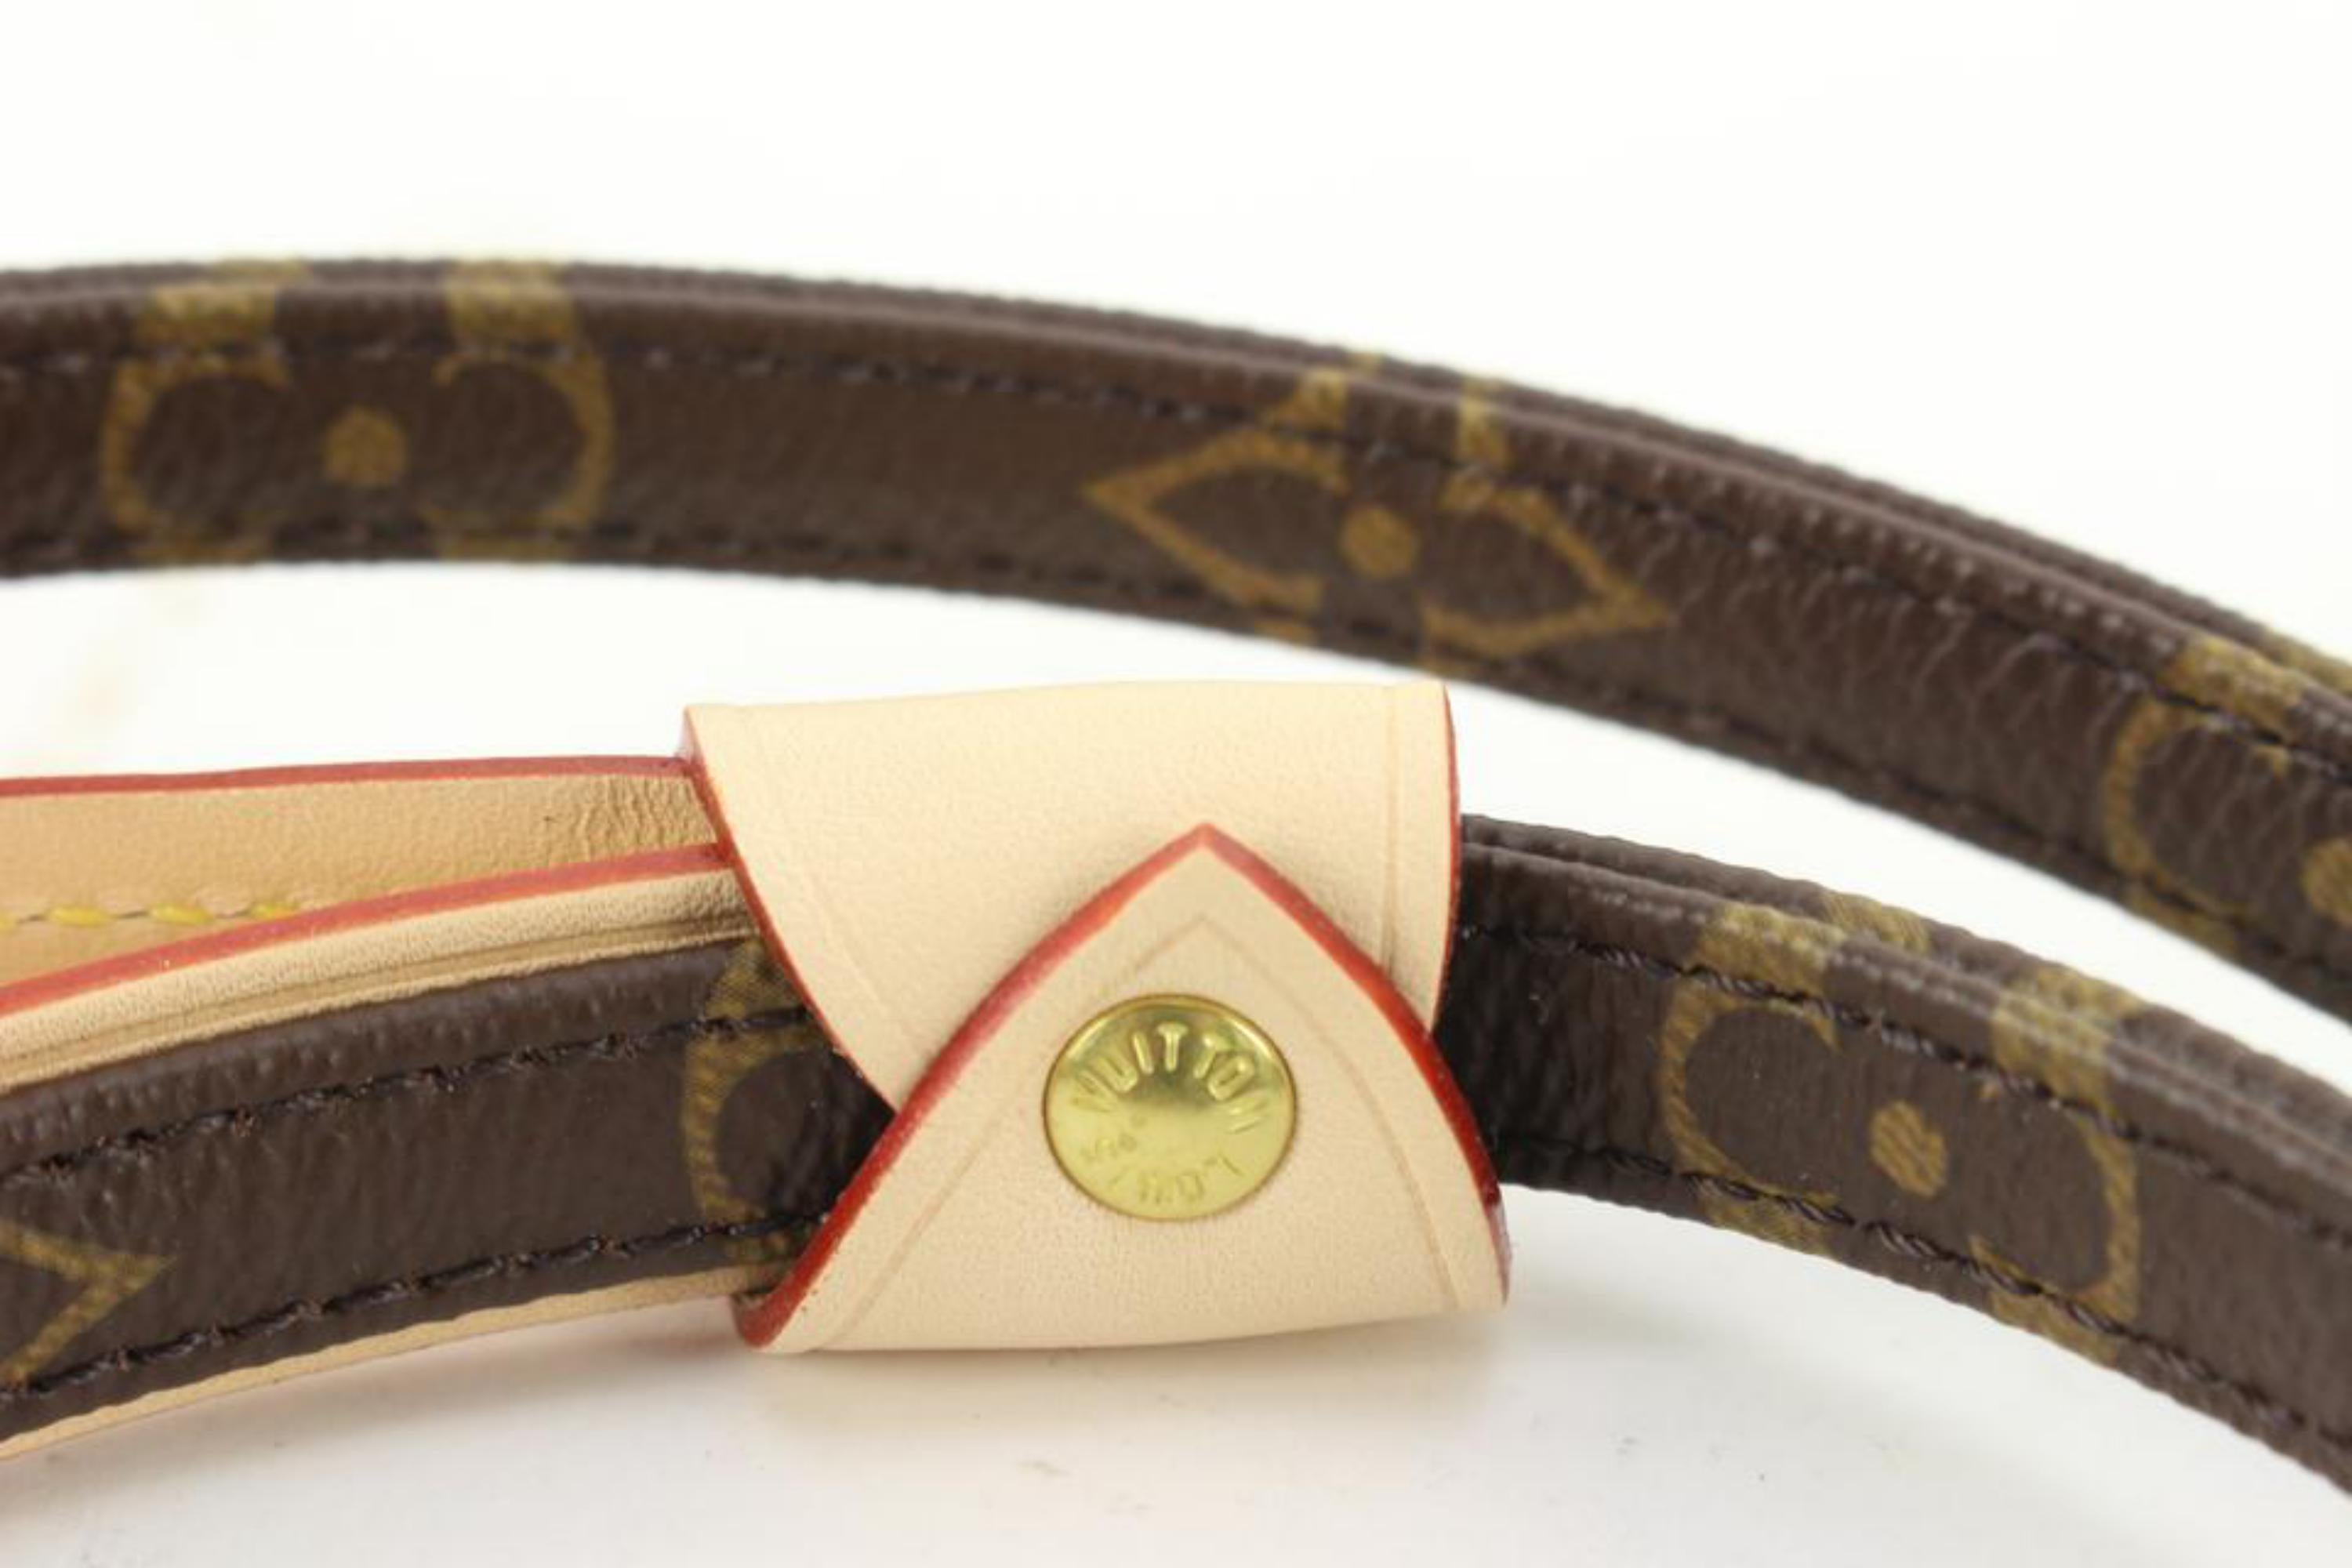 Brand New Louis Vuitton Dog Collar and Leash For Sale at 1stDibs